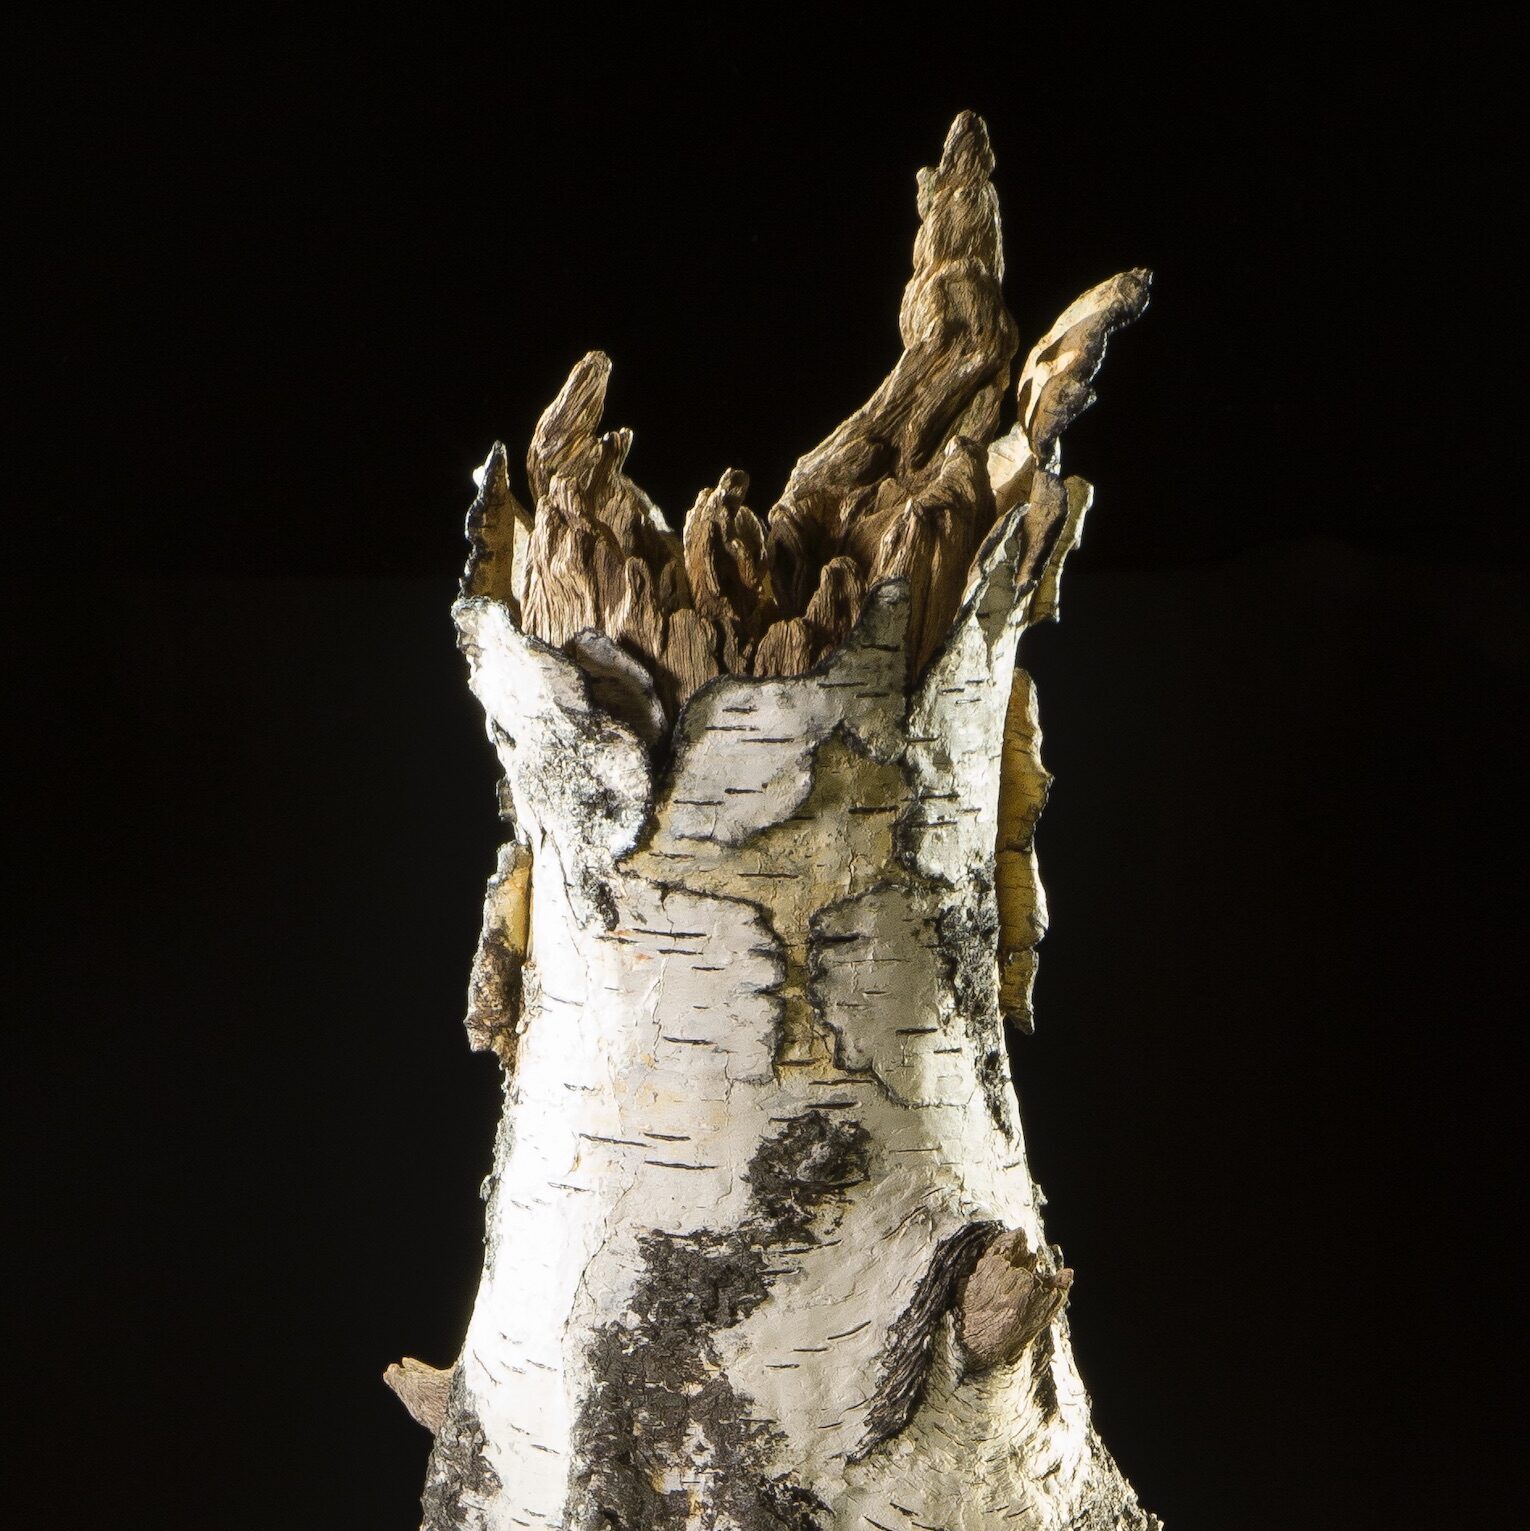 Detail image of a ceramic, tromp l'oeil tree stump made and painted by Eric Serritella in front of a black background.